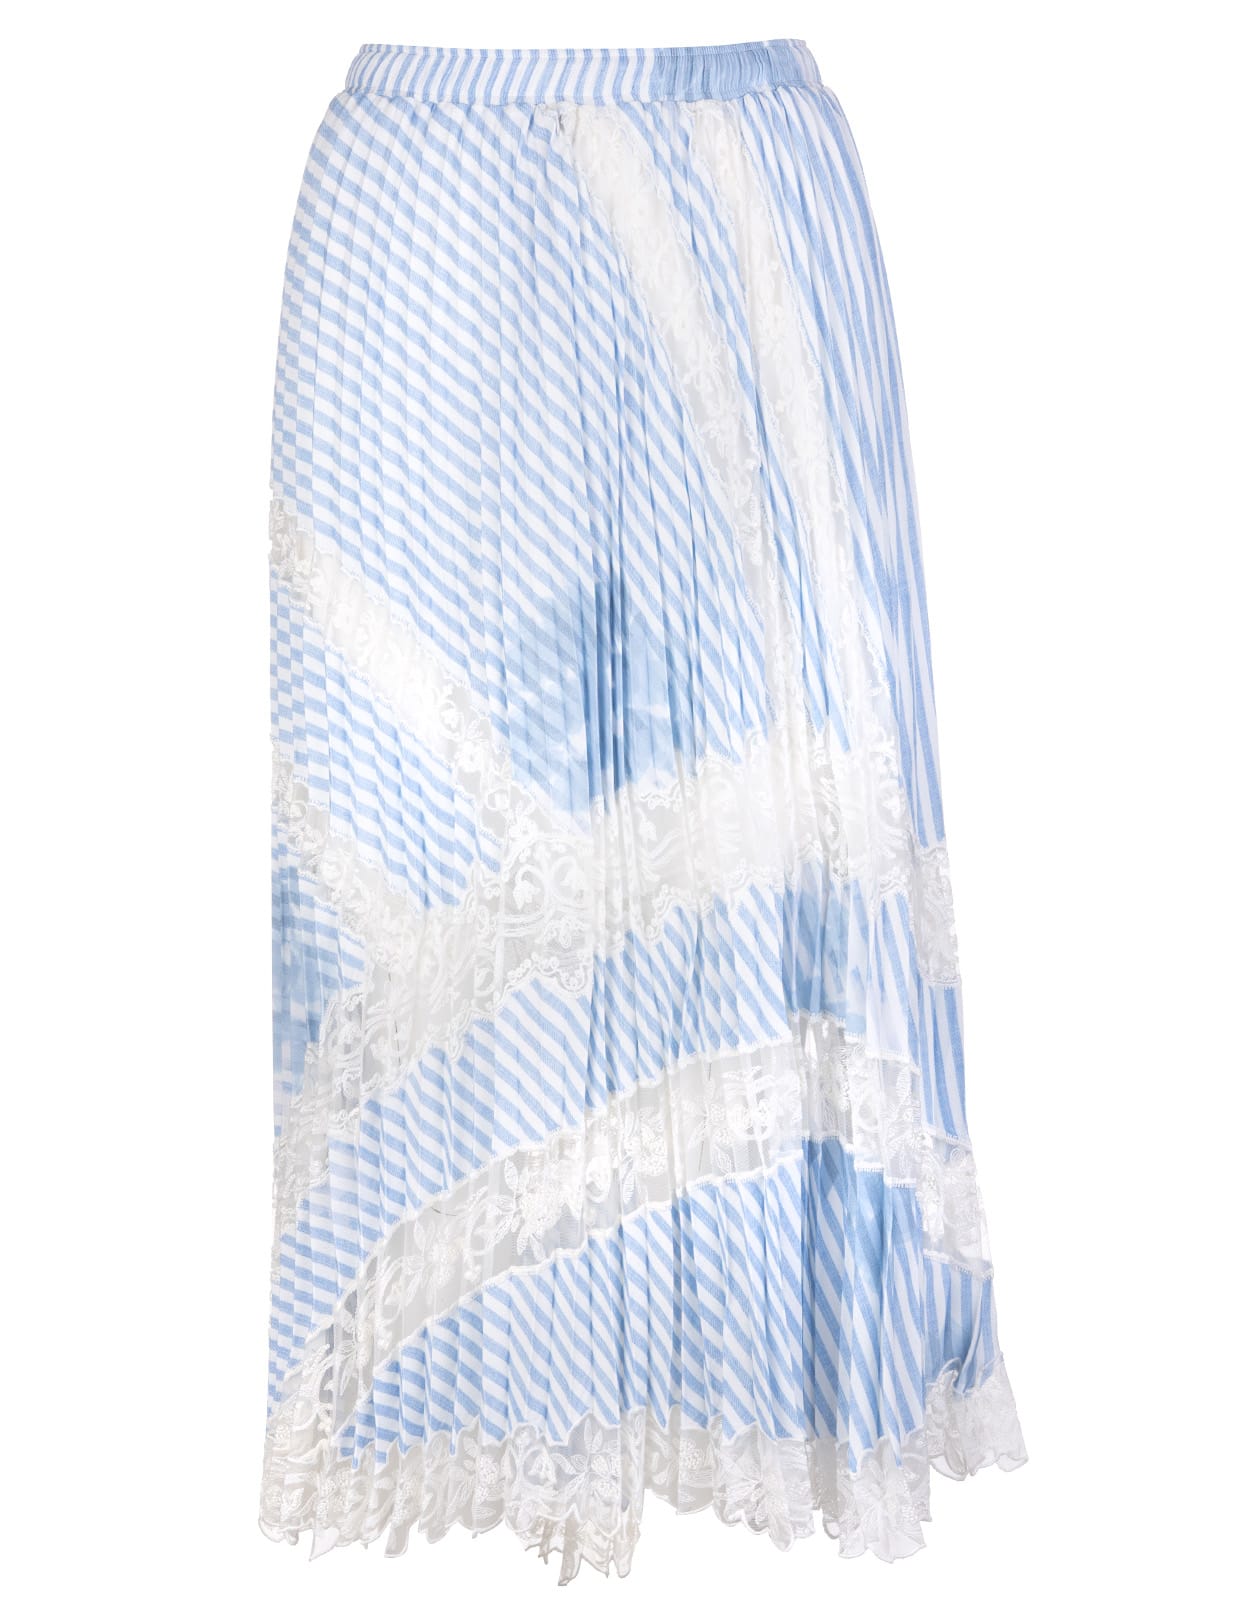 Ermanno Scervino Light Blue Pleated Skirt With Lace Inserts